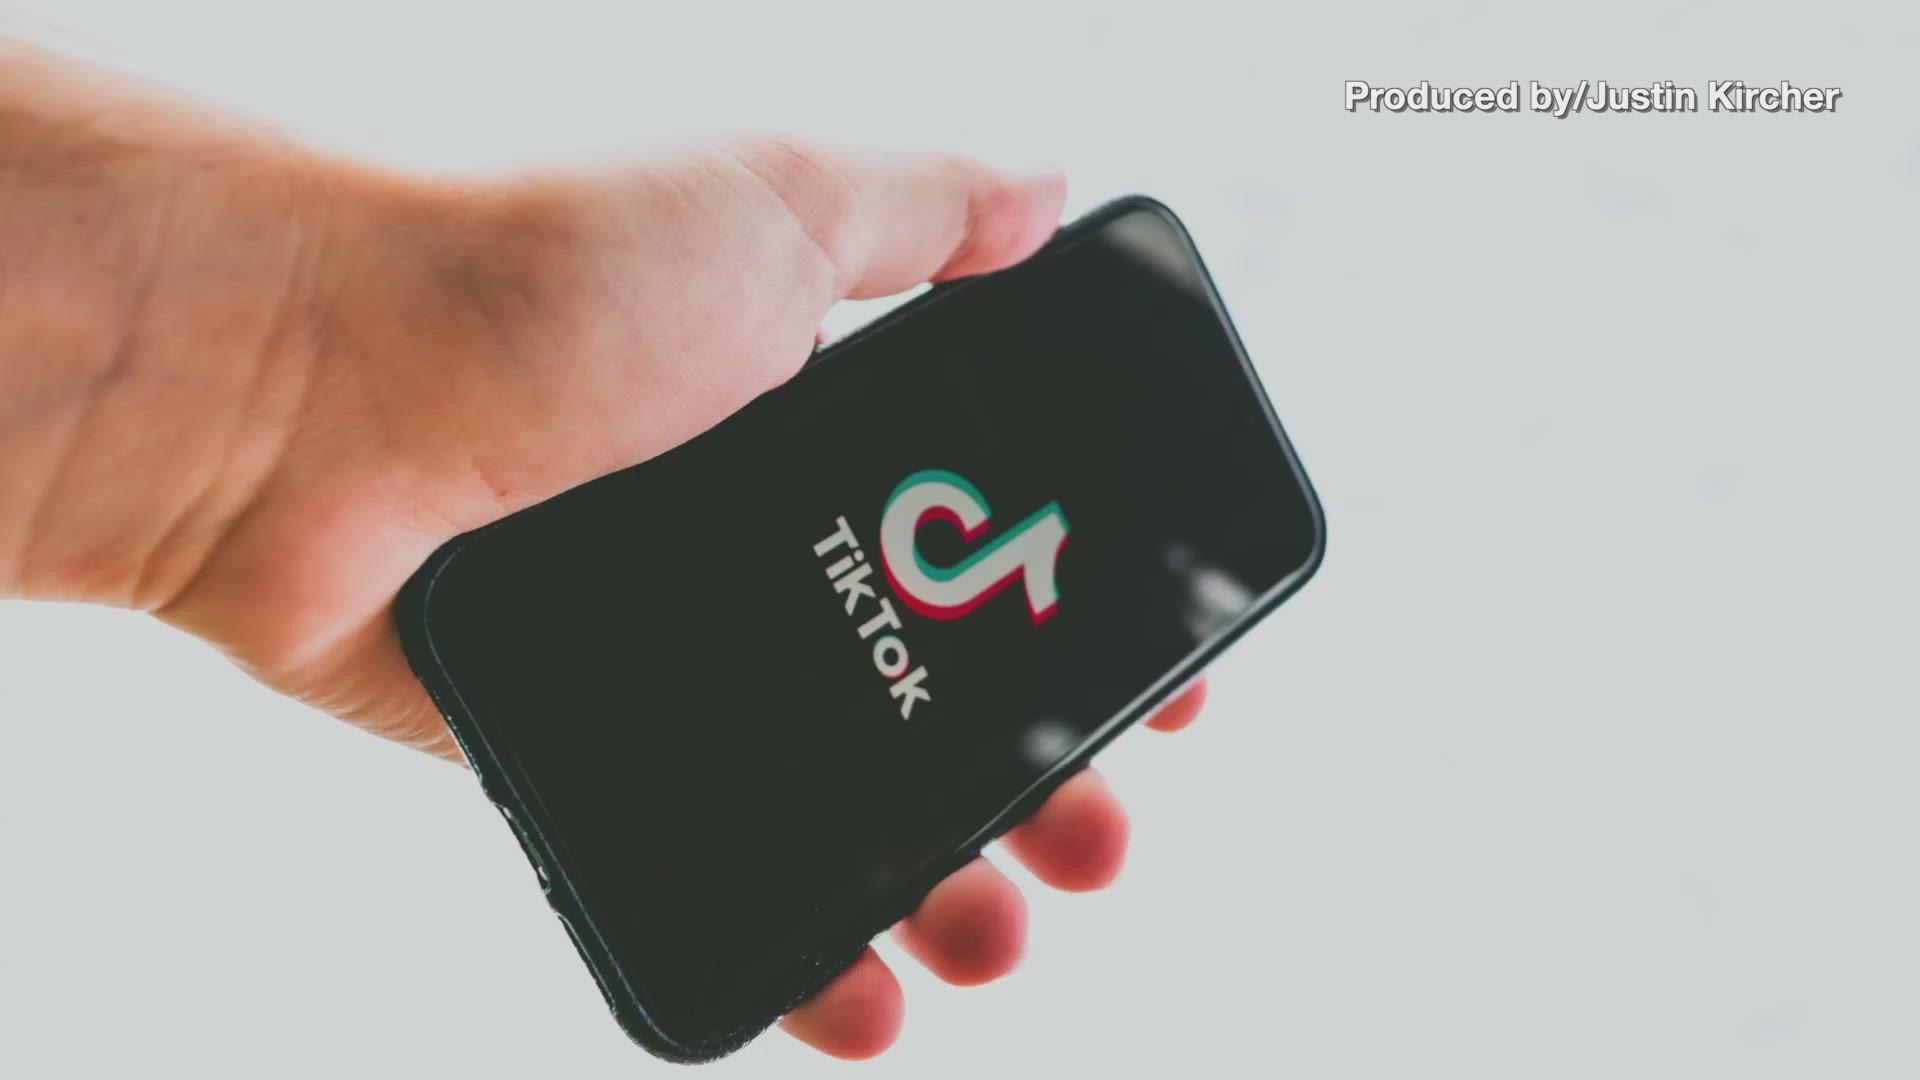 TikTok reportedly went around a Google safeguard to collect data on millions of Android phone users, which tracked them without allowing them to opt out. Veuer's Justin Kircher has the story.